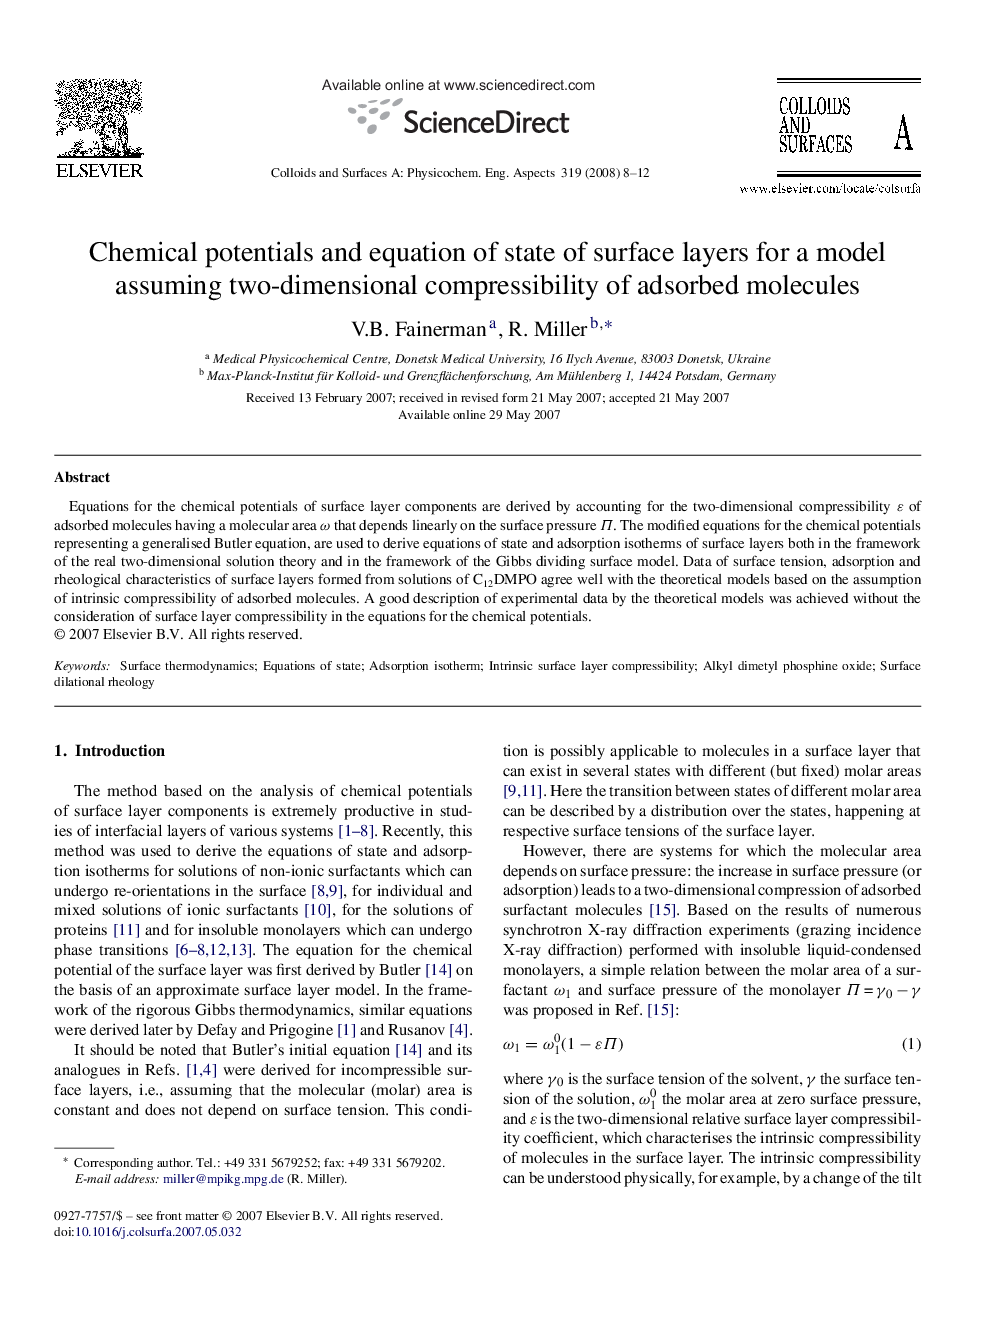 Chemical potentials and equation of state of surface layers for a model assuming two-dimensional compressibility of adsorbed molecules